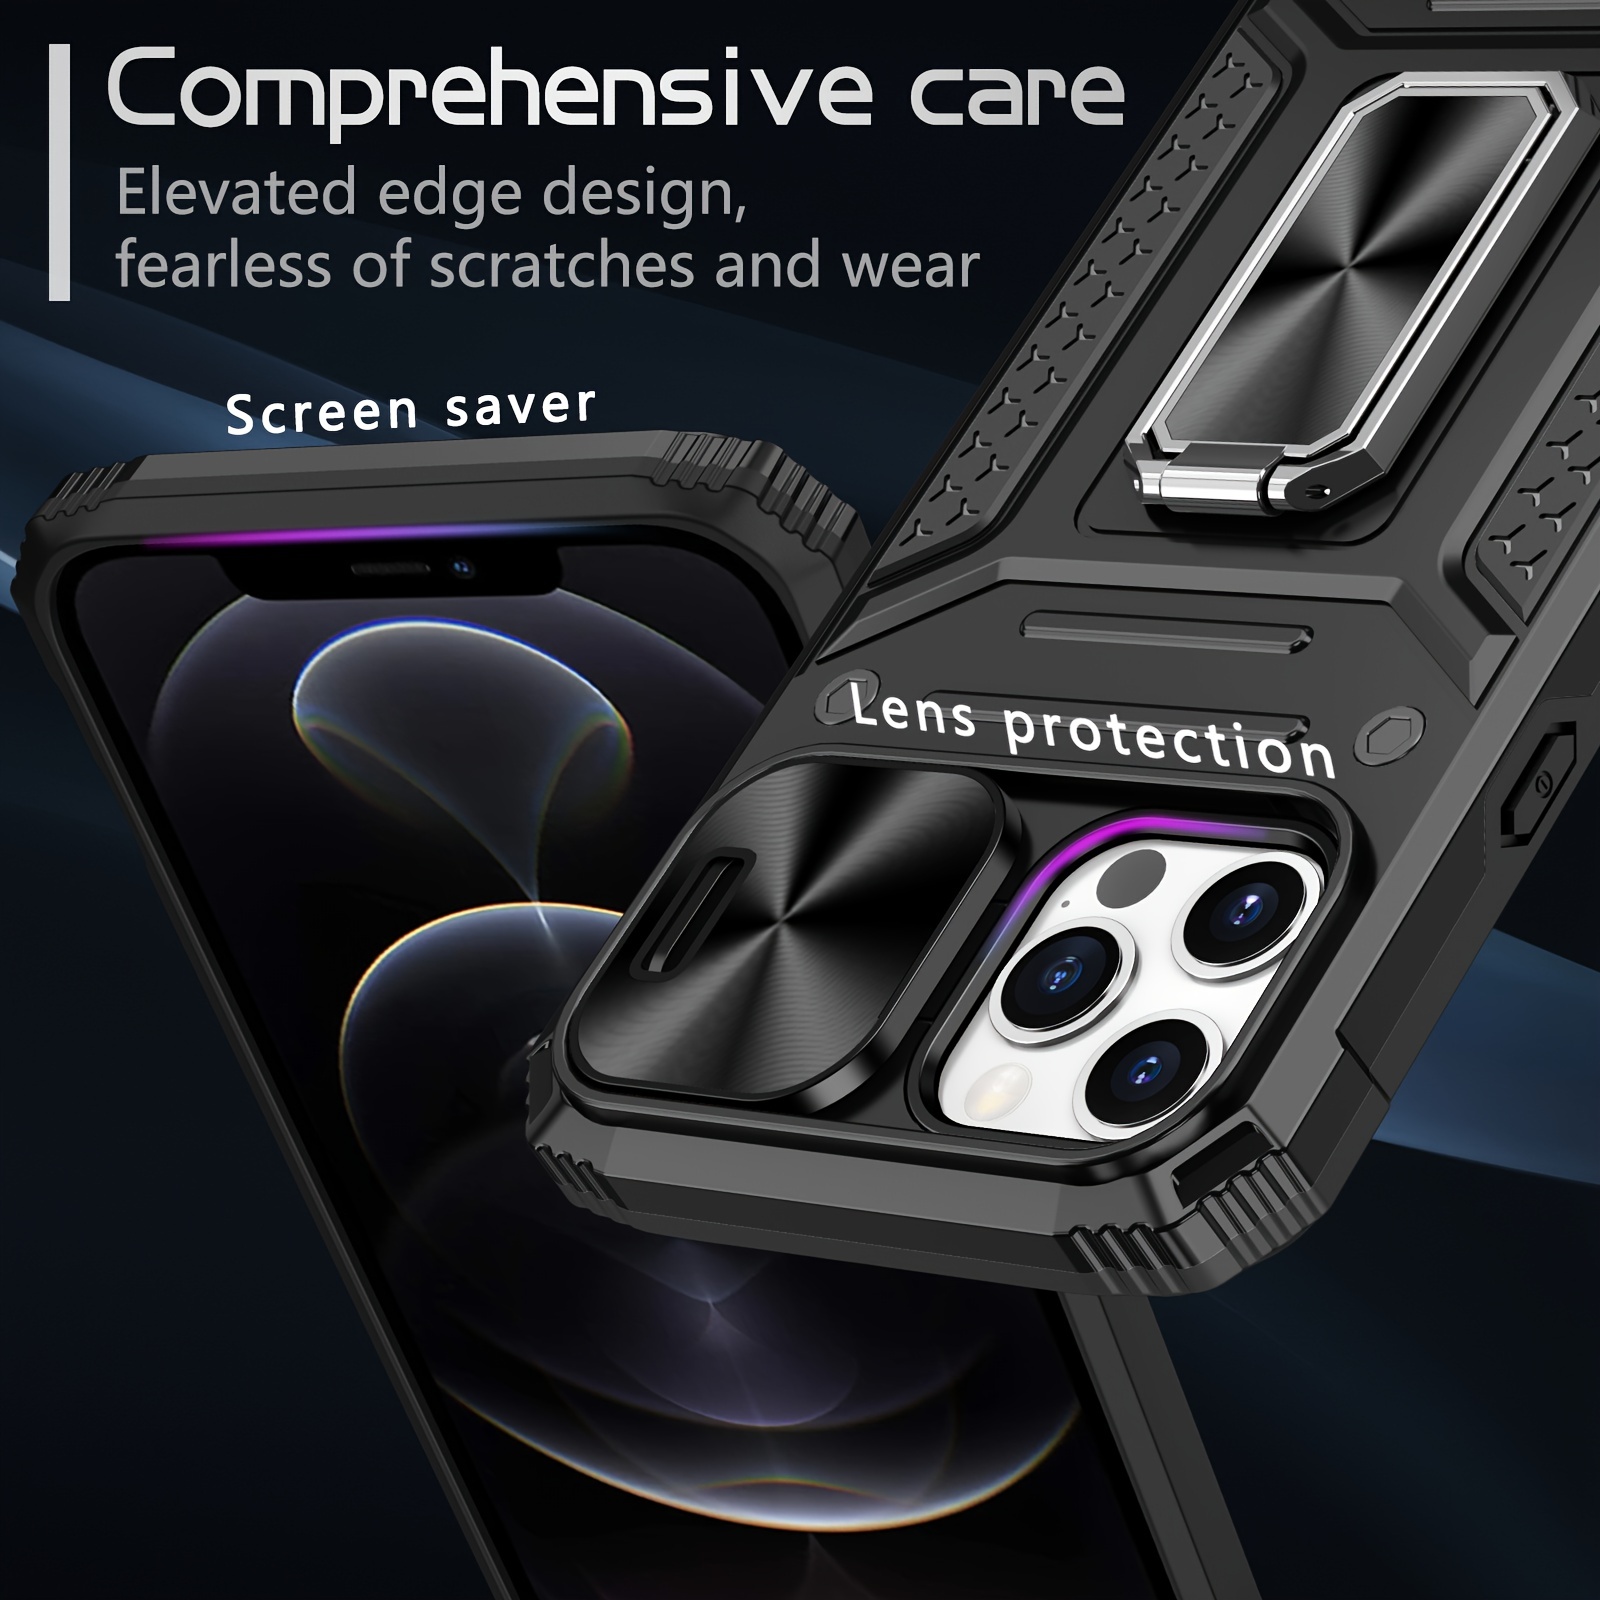 iPhone 12 Pro Max Case - Nillkin Protective Cover